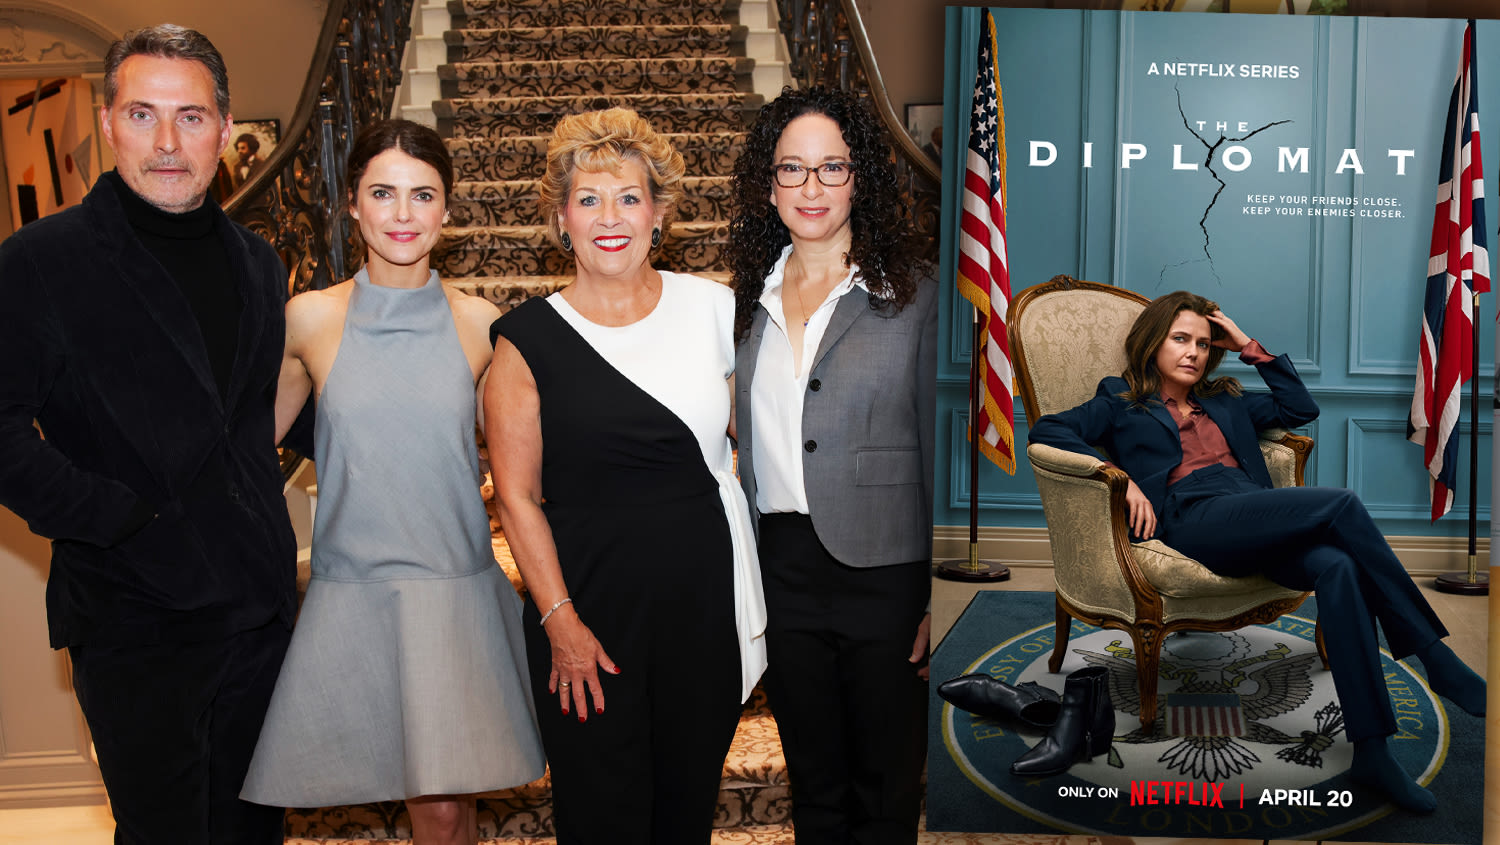 ‘The Diplomat’ Creator And Cast Meet A Real-Life Counterpart To Talk About Netflix Series’ Blend Of High-Octane...